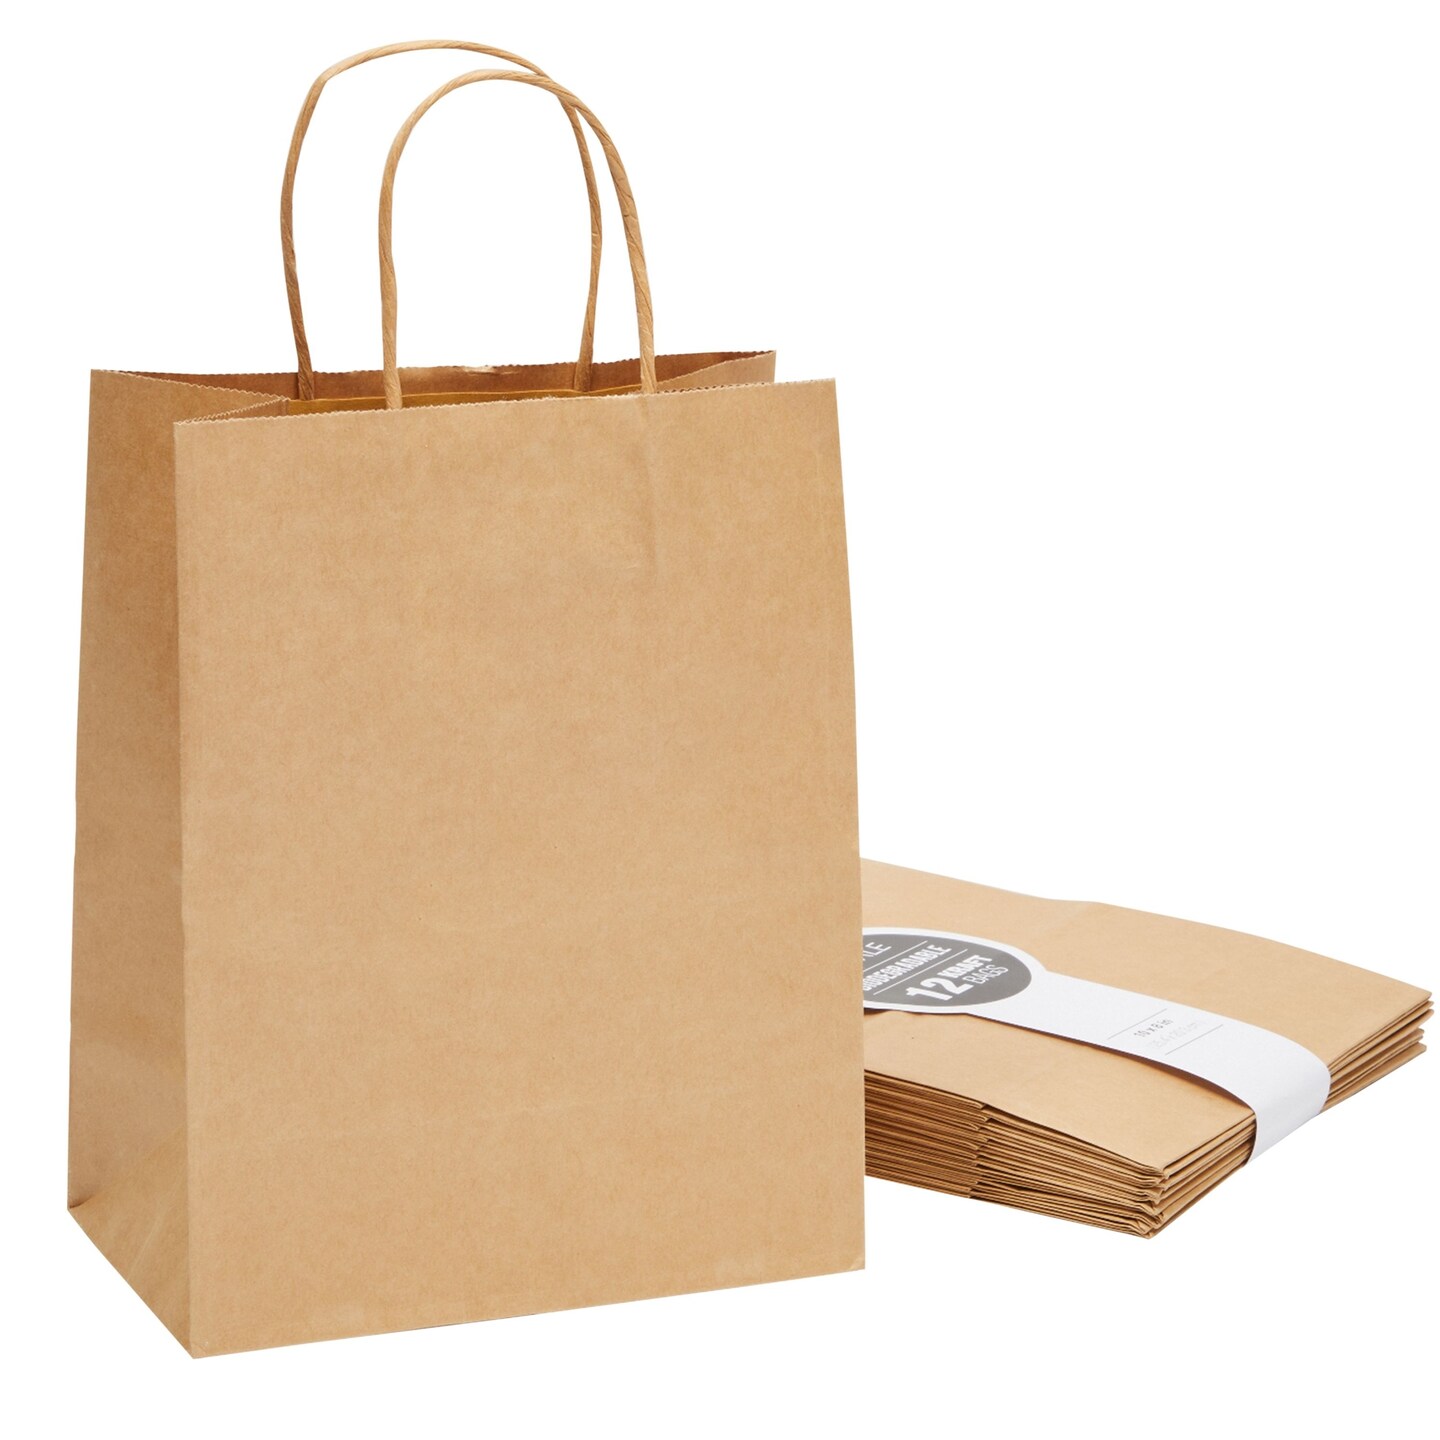 How to add Handle to Paper Bags? 